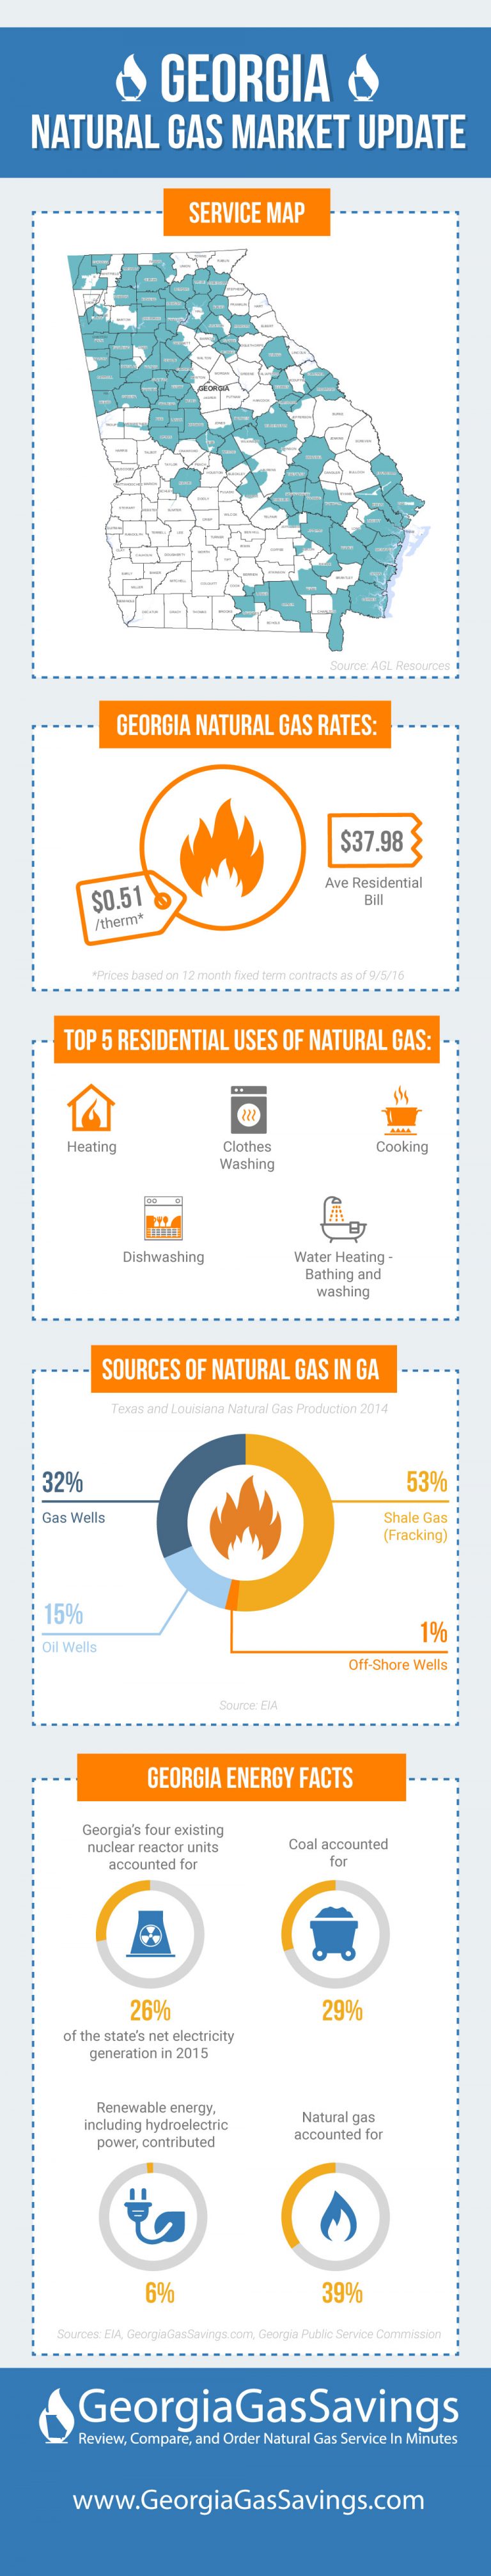 Natural Gas Rates Market Update [Infographic]